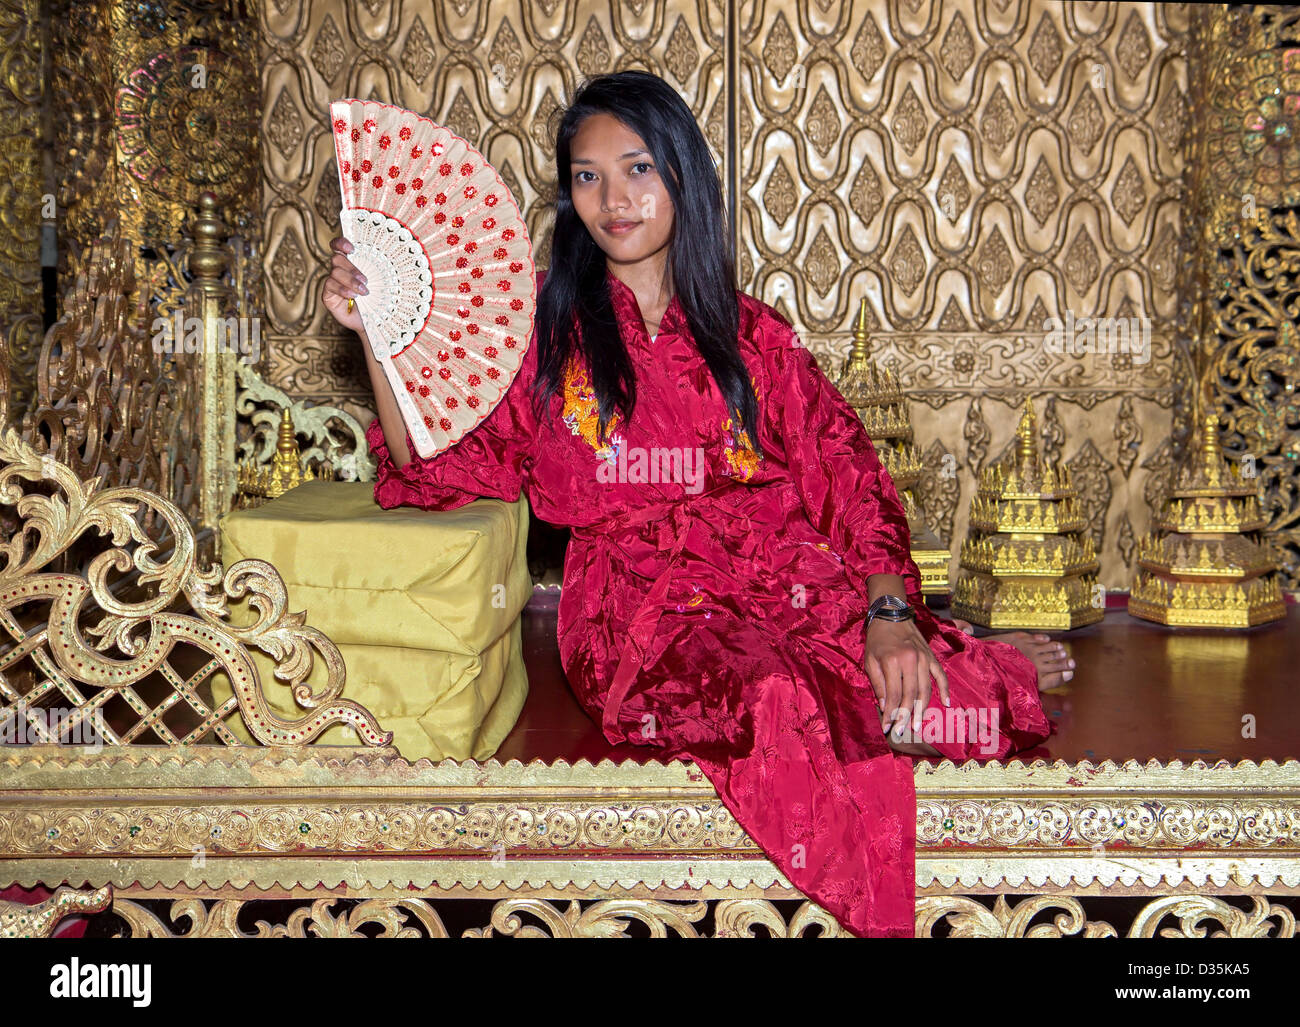 Thai woman sitting in the throne room Stock Photo